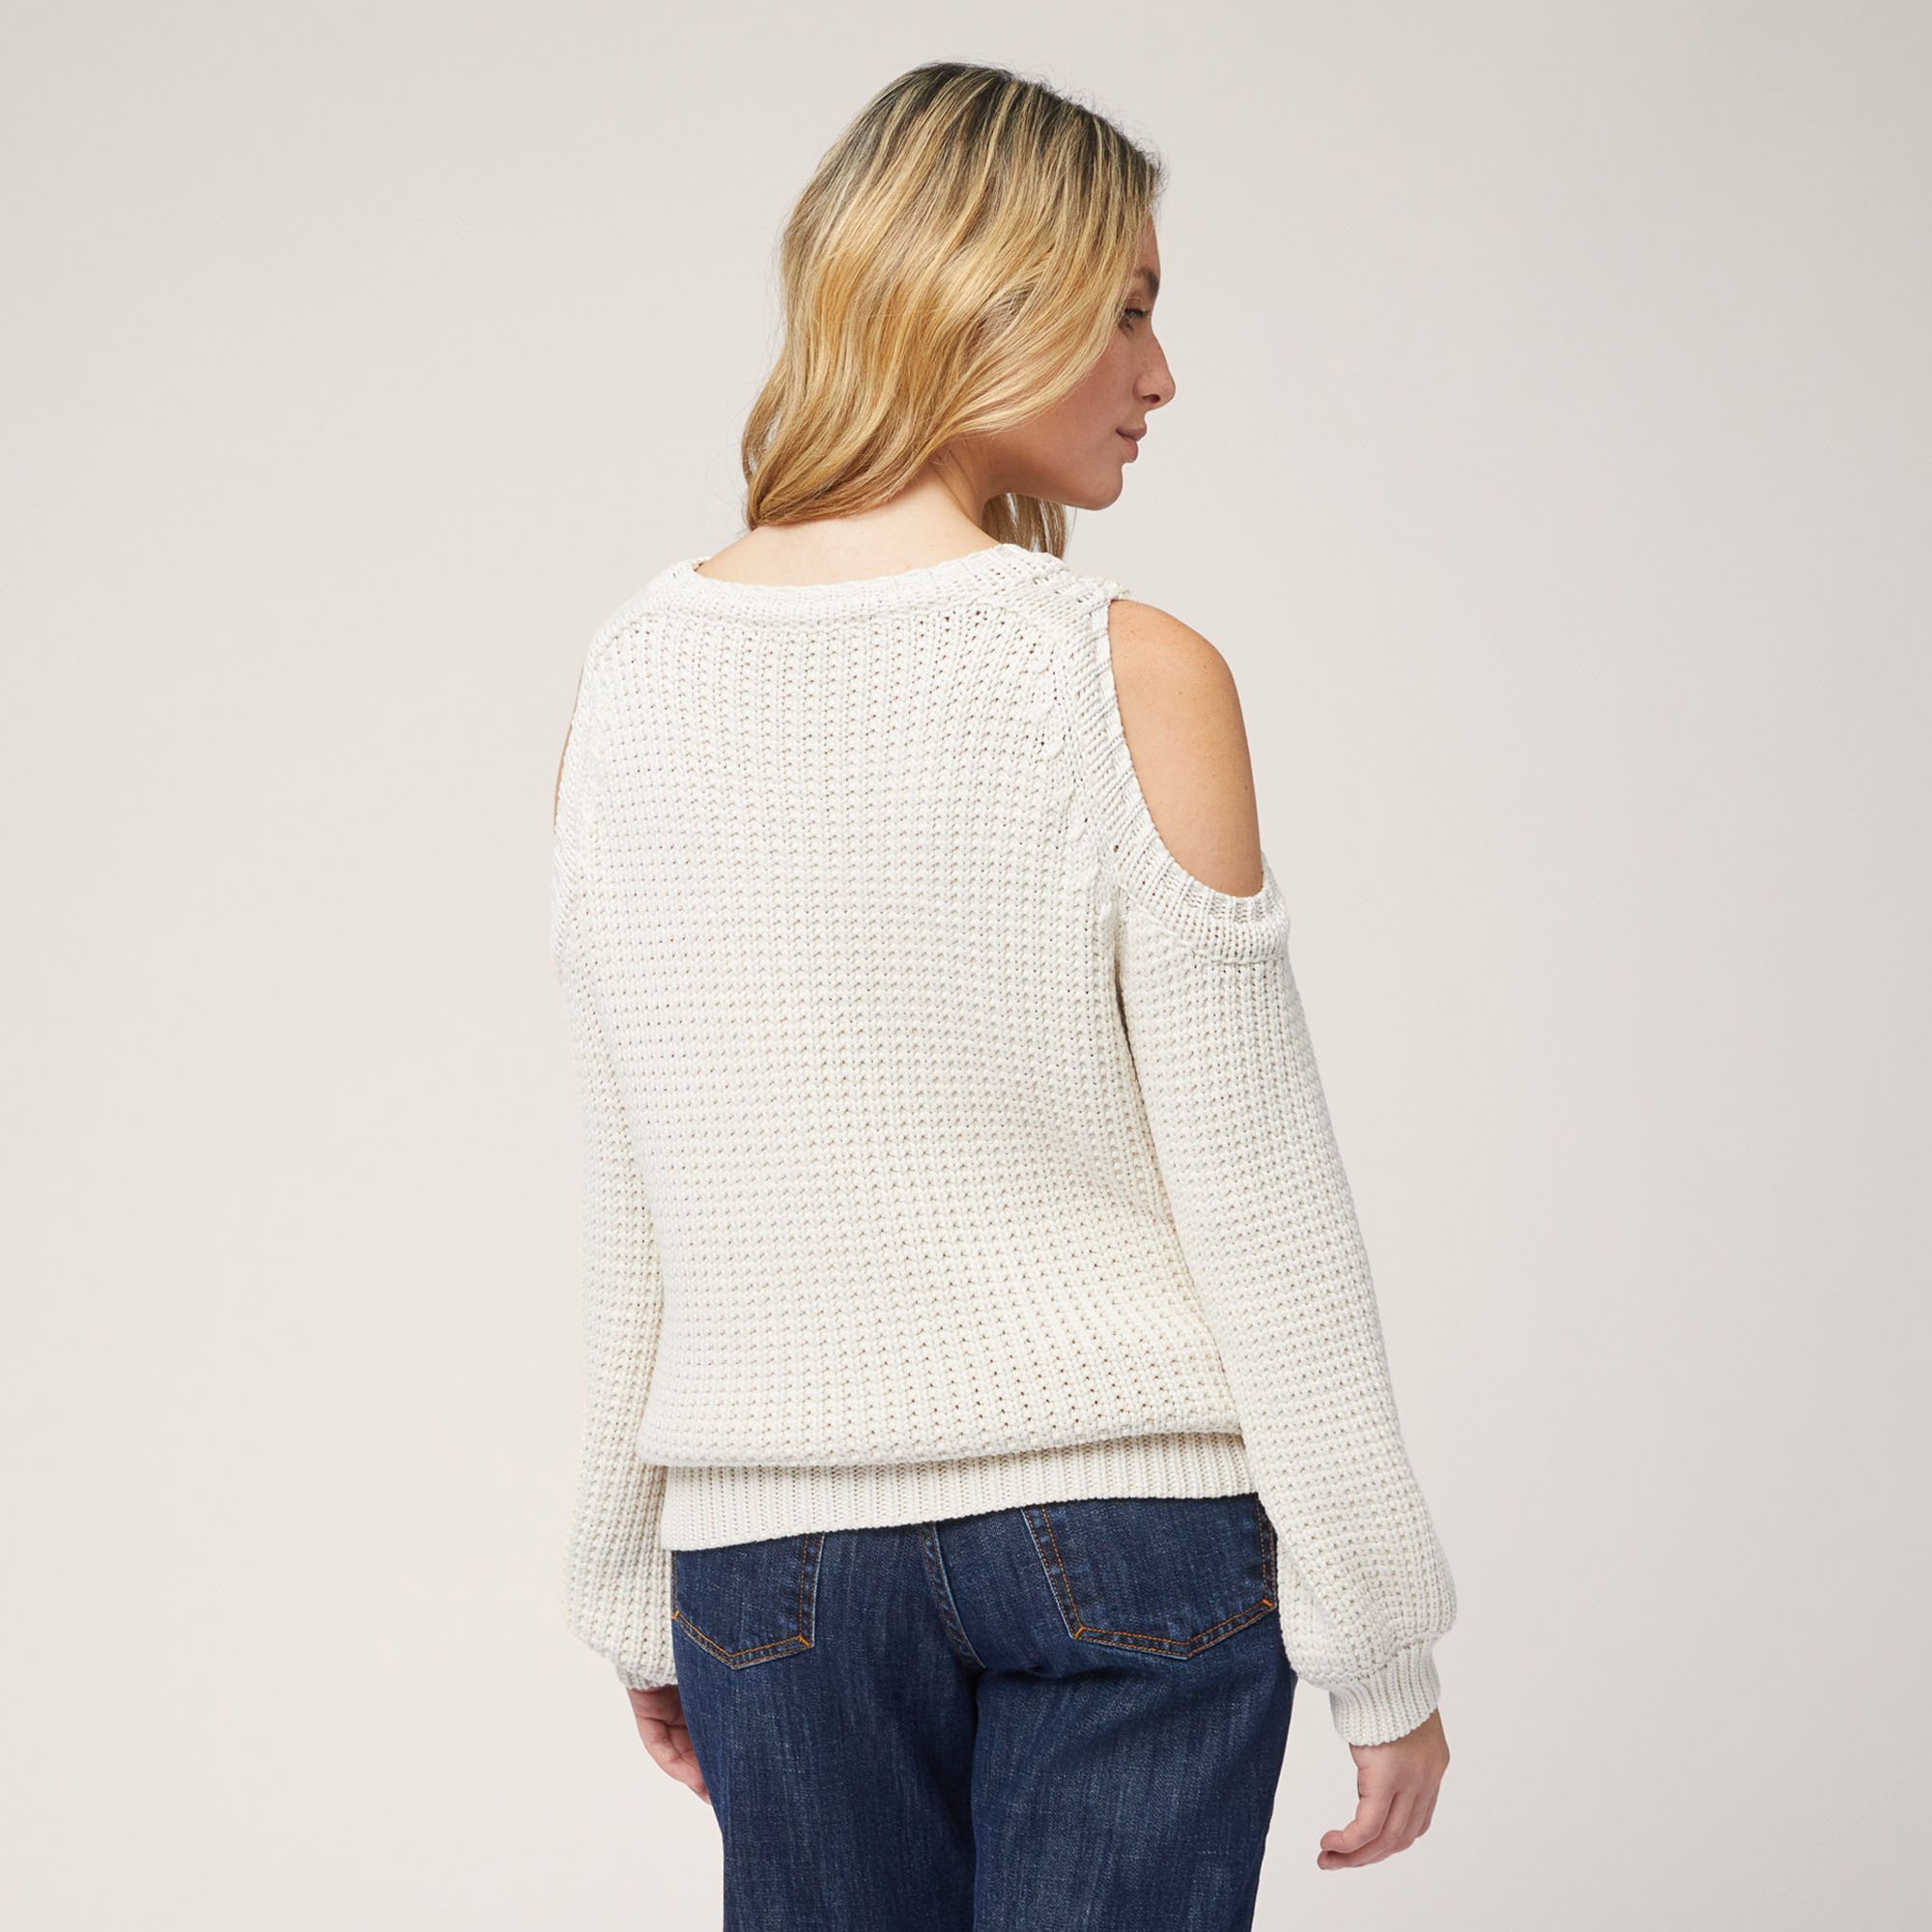 Sweater with Shoulder Openings, Beige, large image number 1